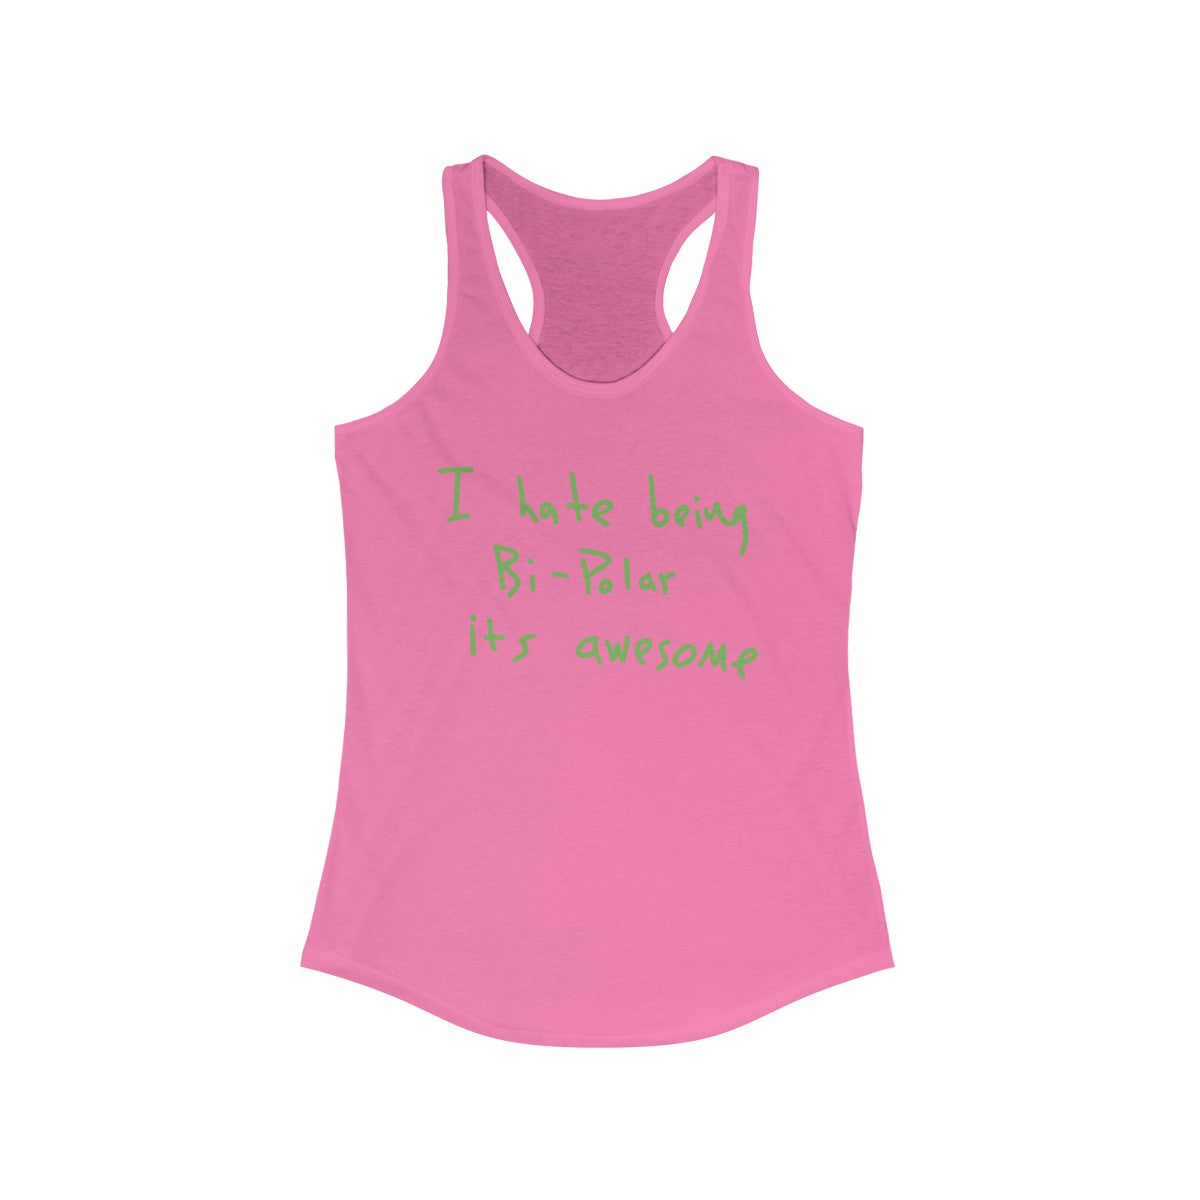 I Hate Being Bi-Polar It's Awesome Kanye West inspired Women's Ideal Racerback Tank-Solid Hot Pink-XS-Archethype